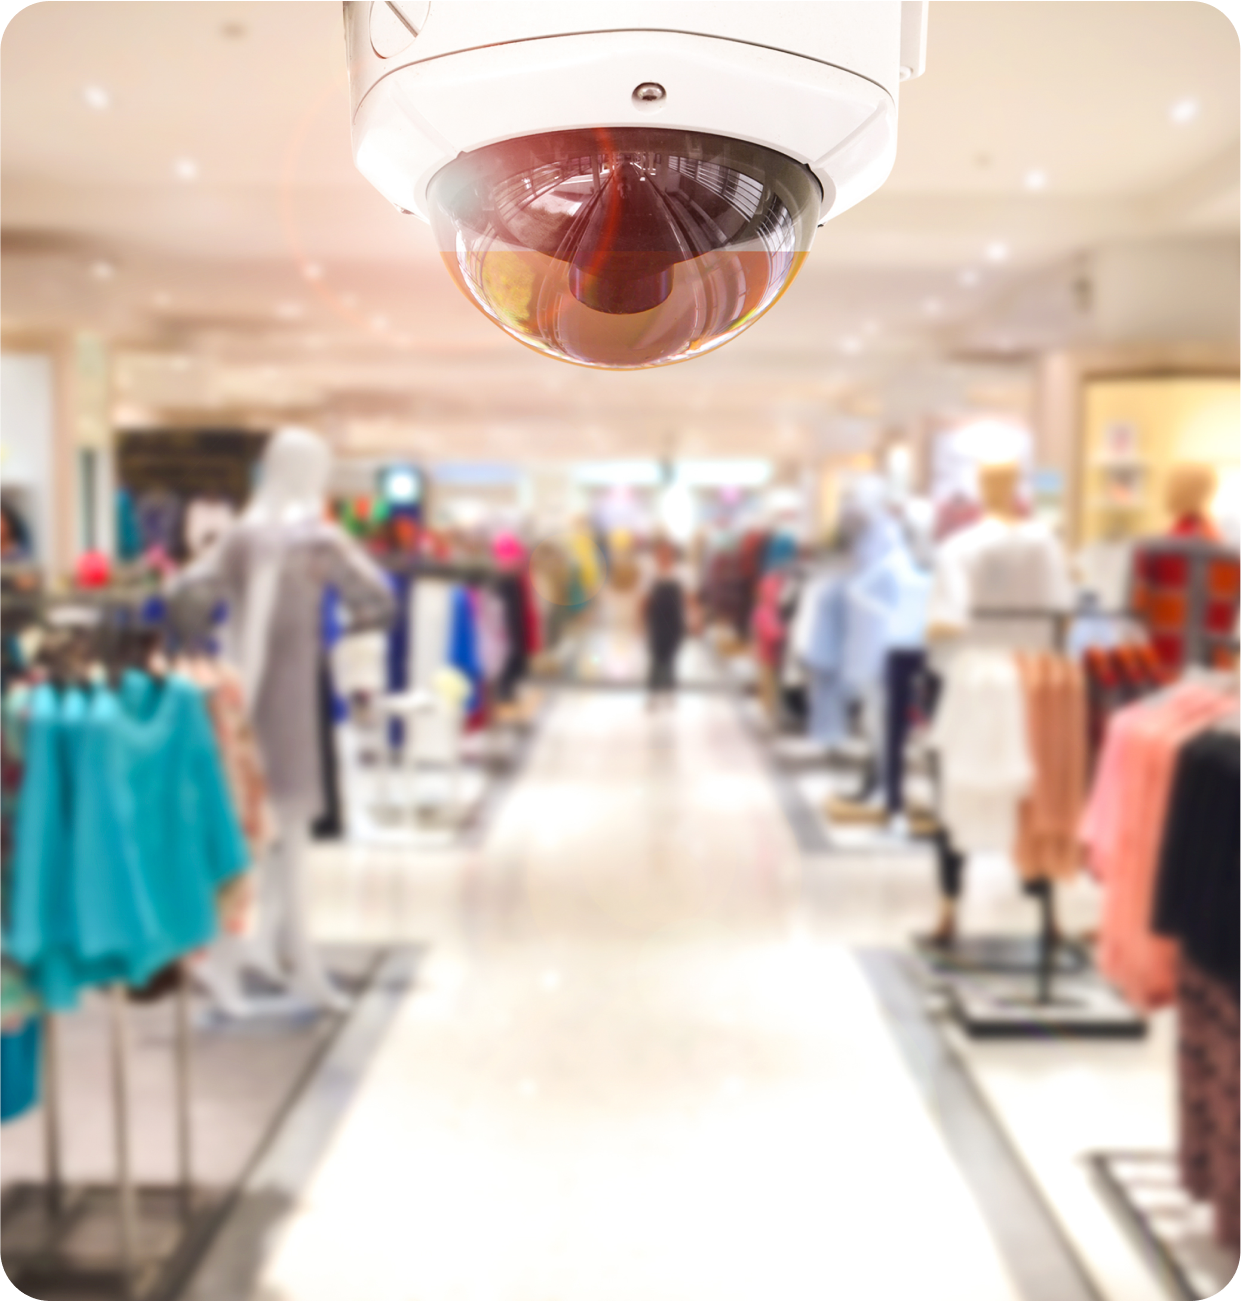 Multi-Layer Commercial Monitoring Systems - PasWord Protection